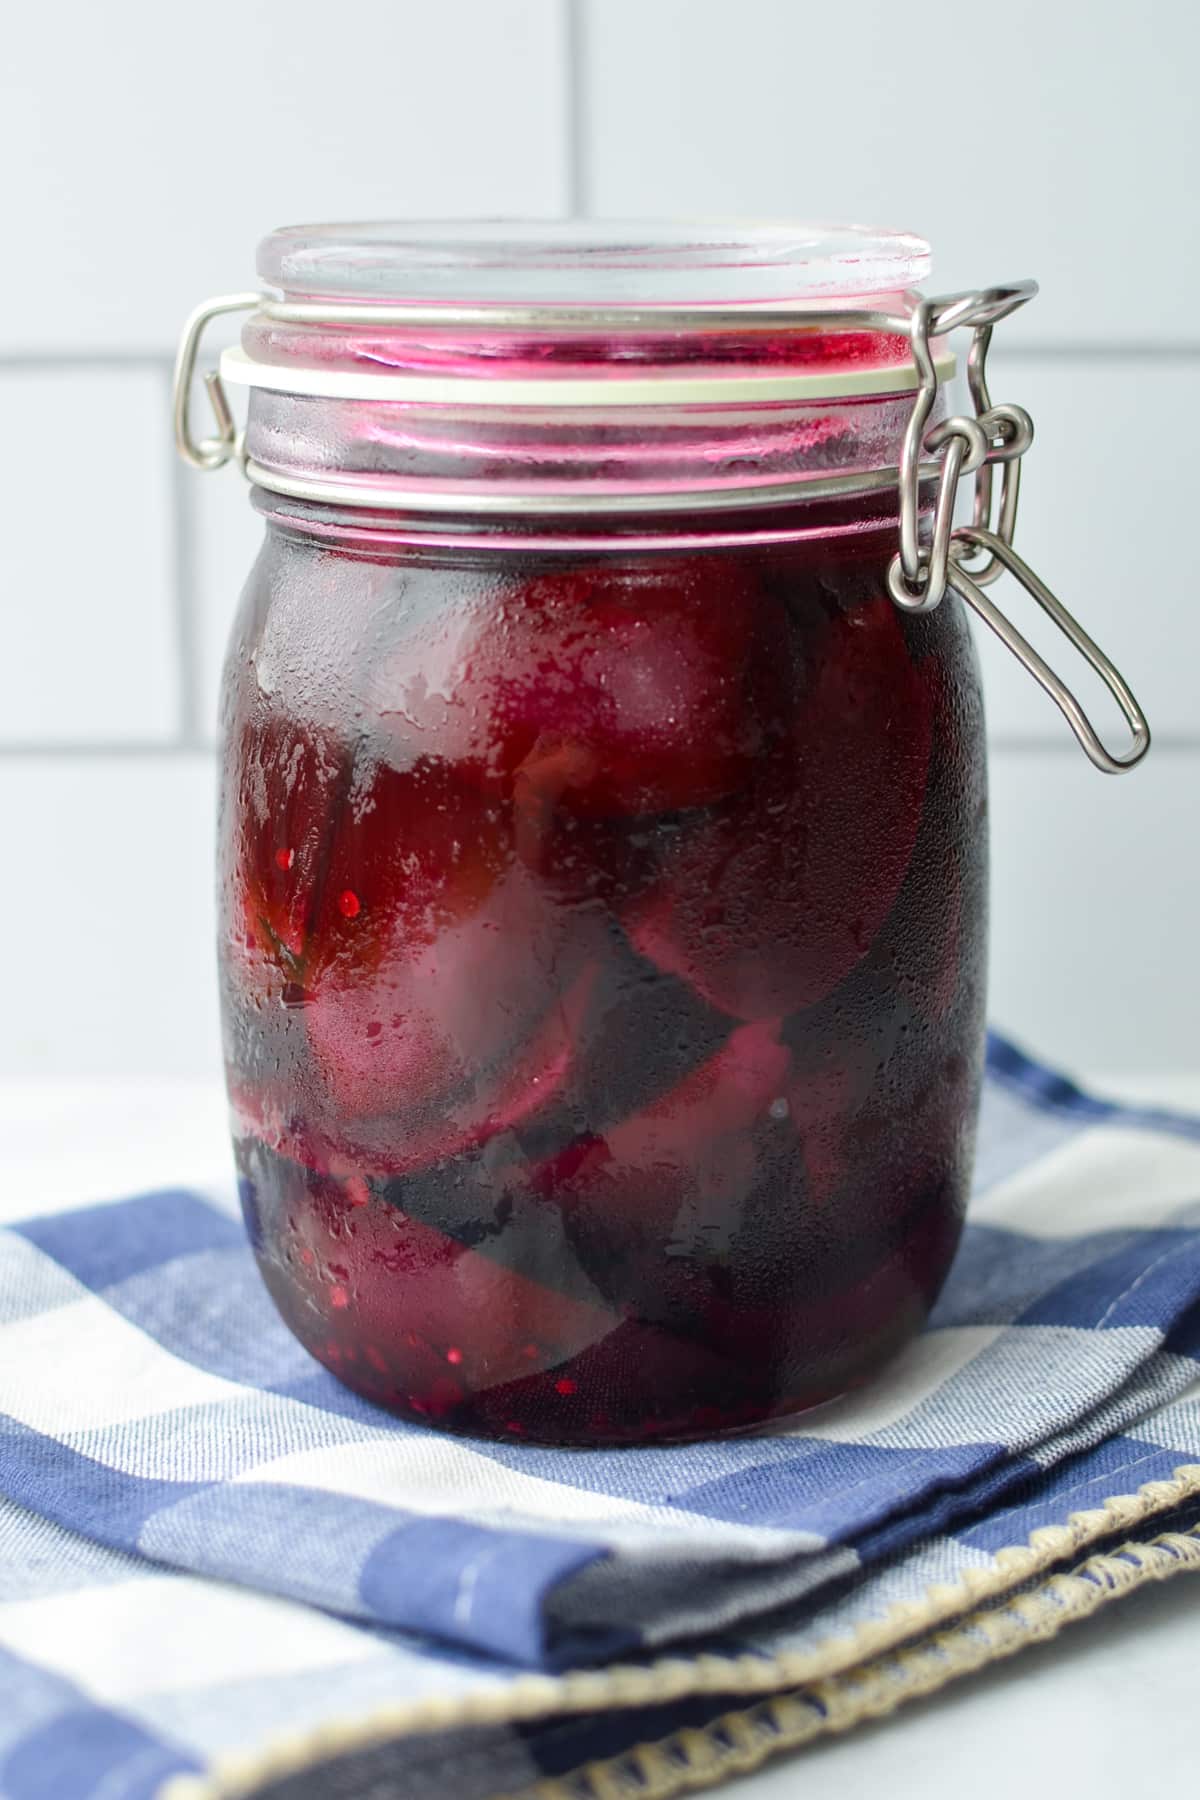 A jar of pickled beets resting on a cloth.